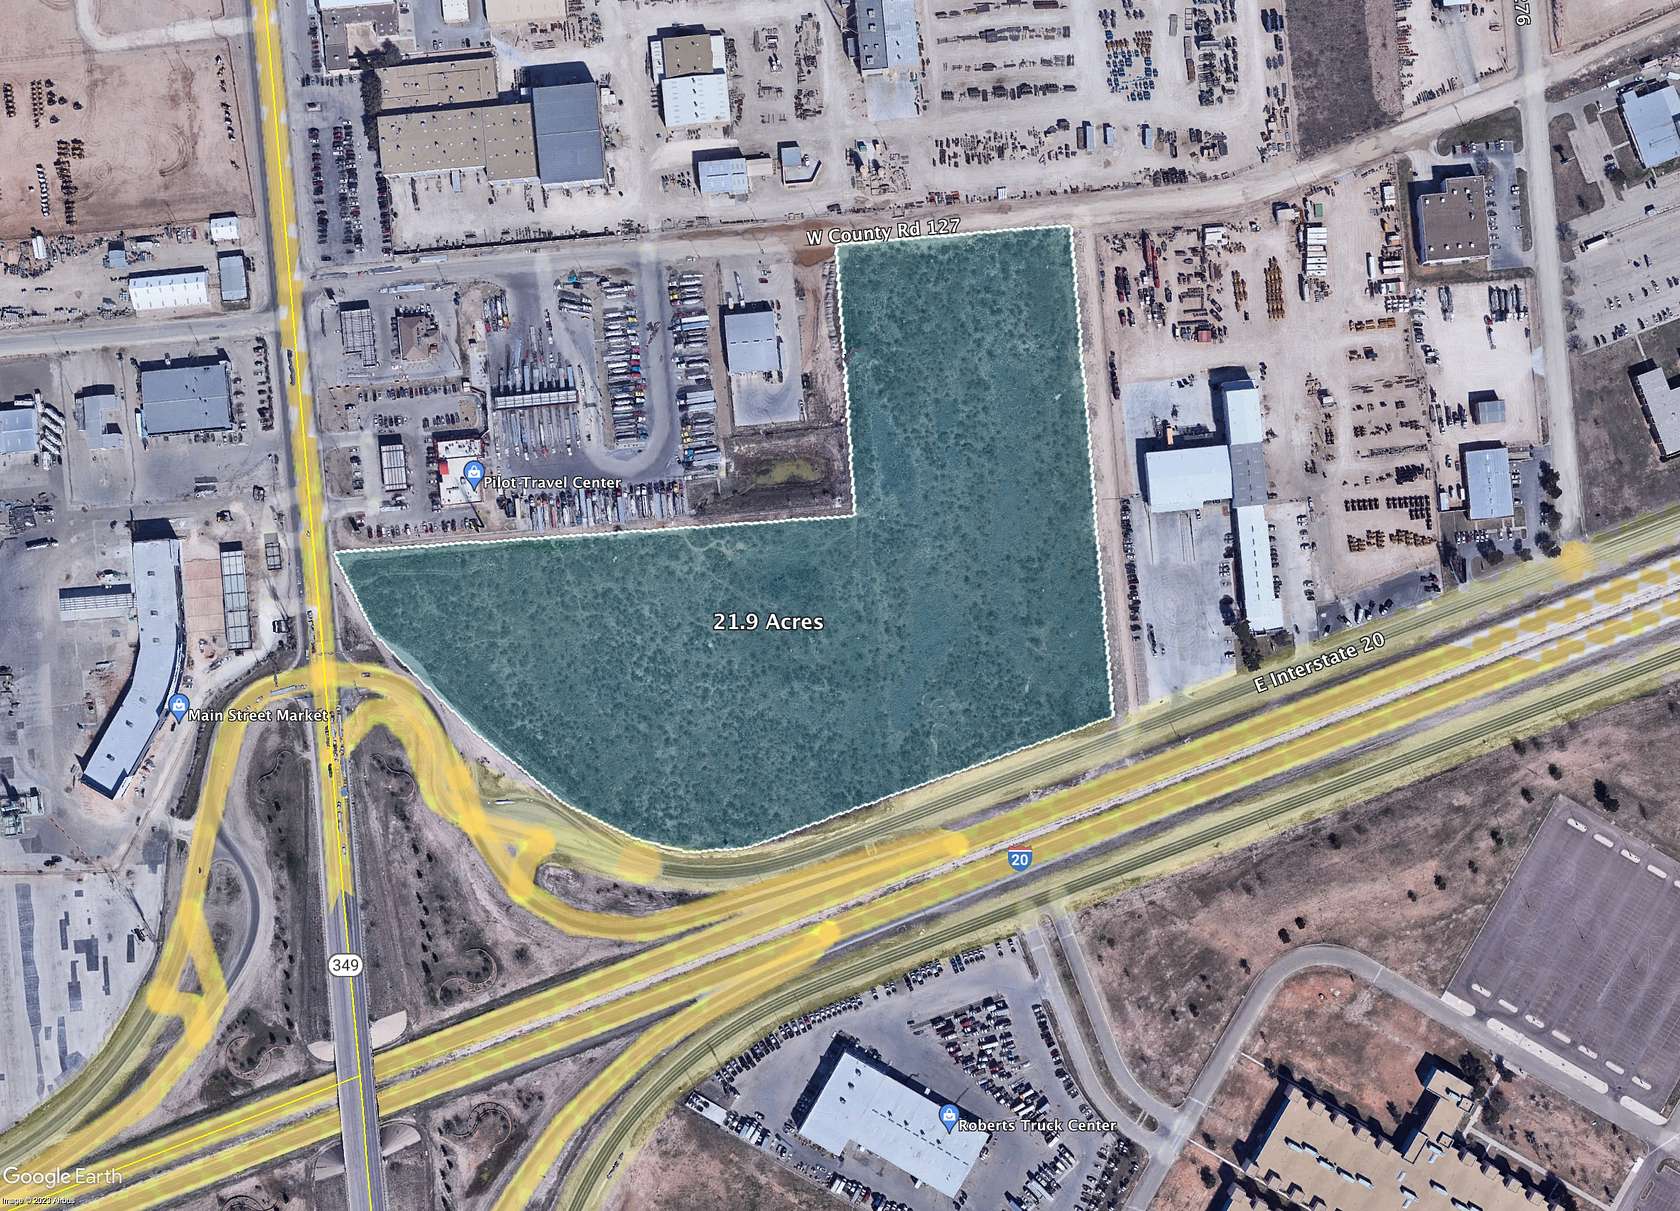 21.6 Acres of Land for Sale in Midland, Texas